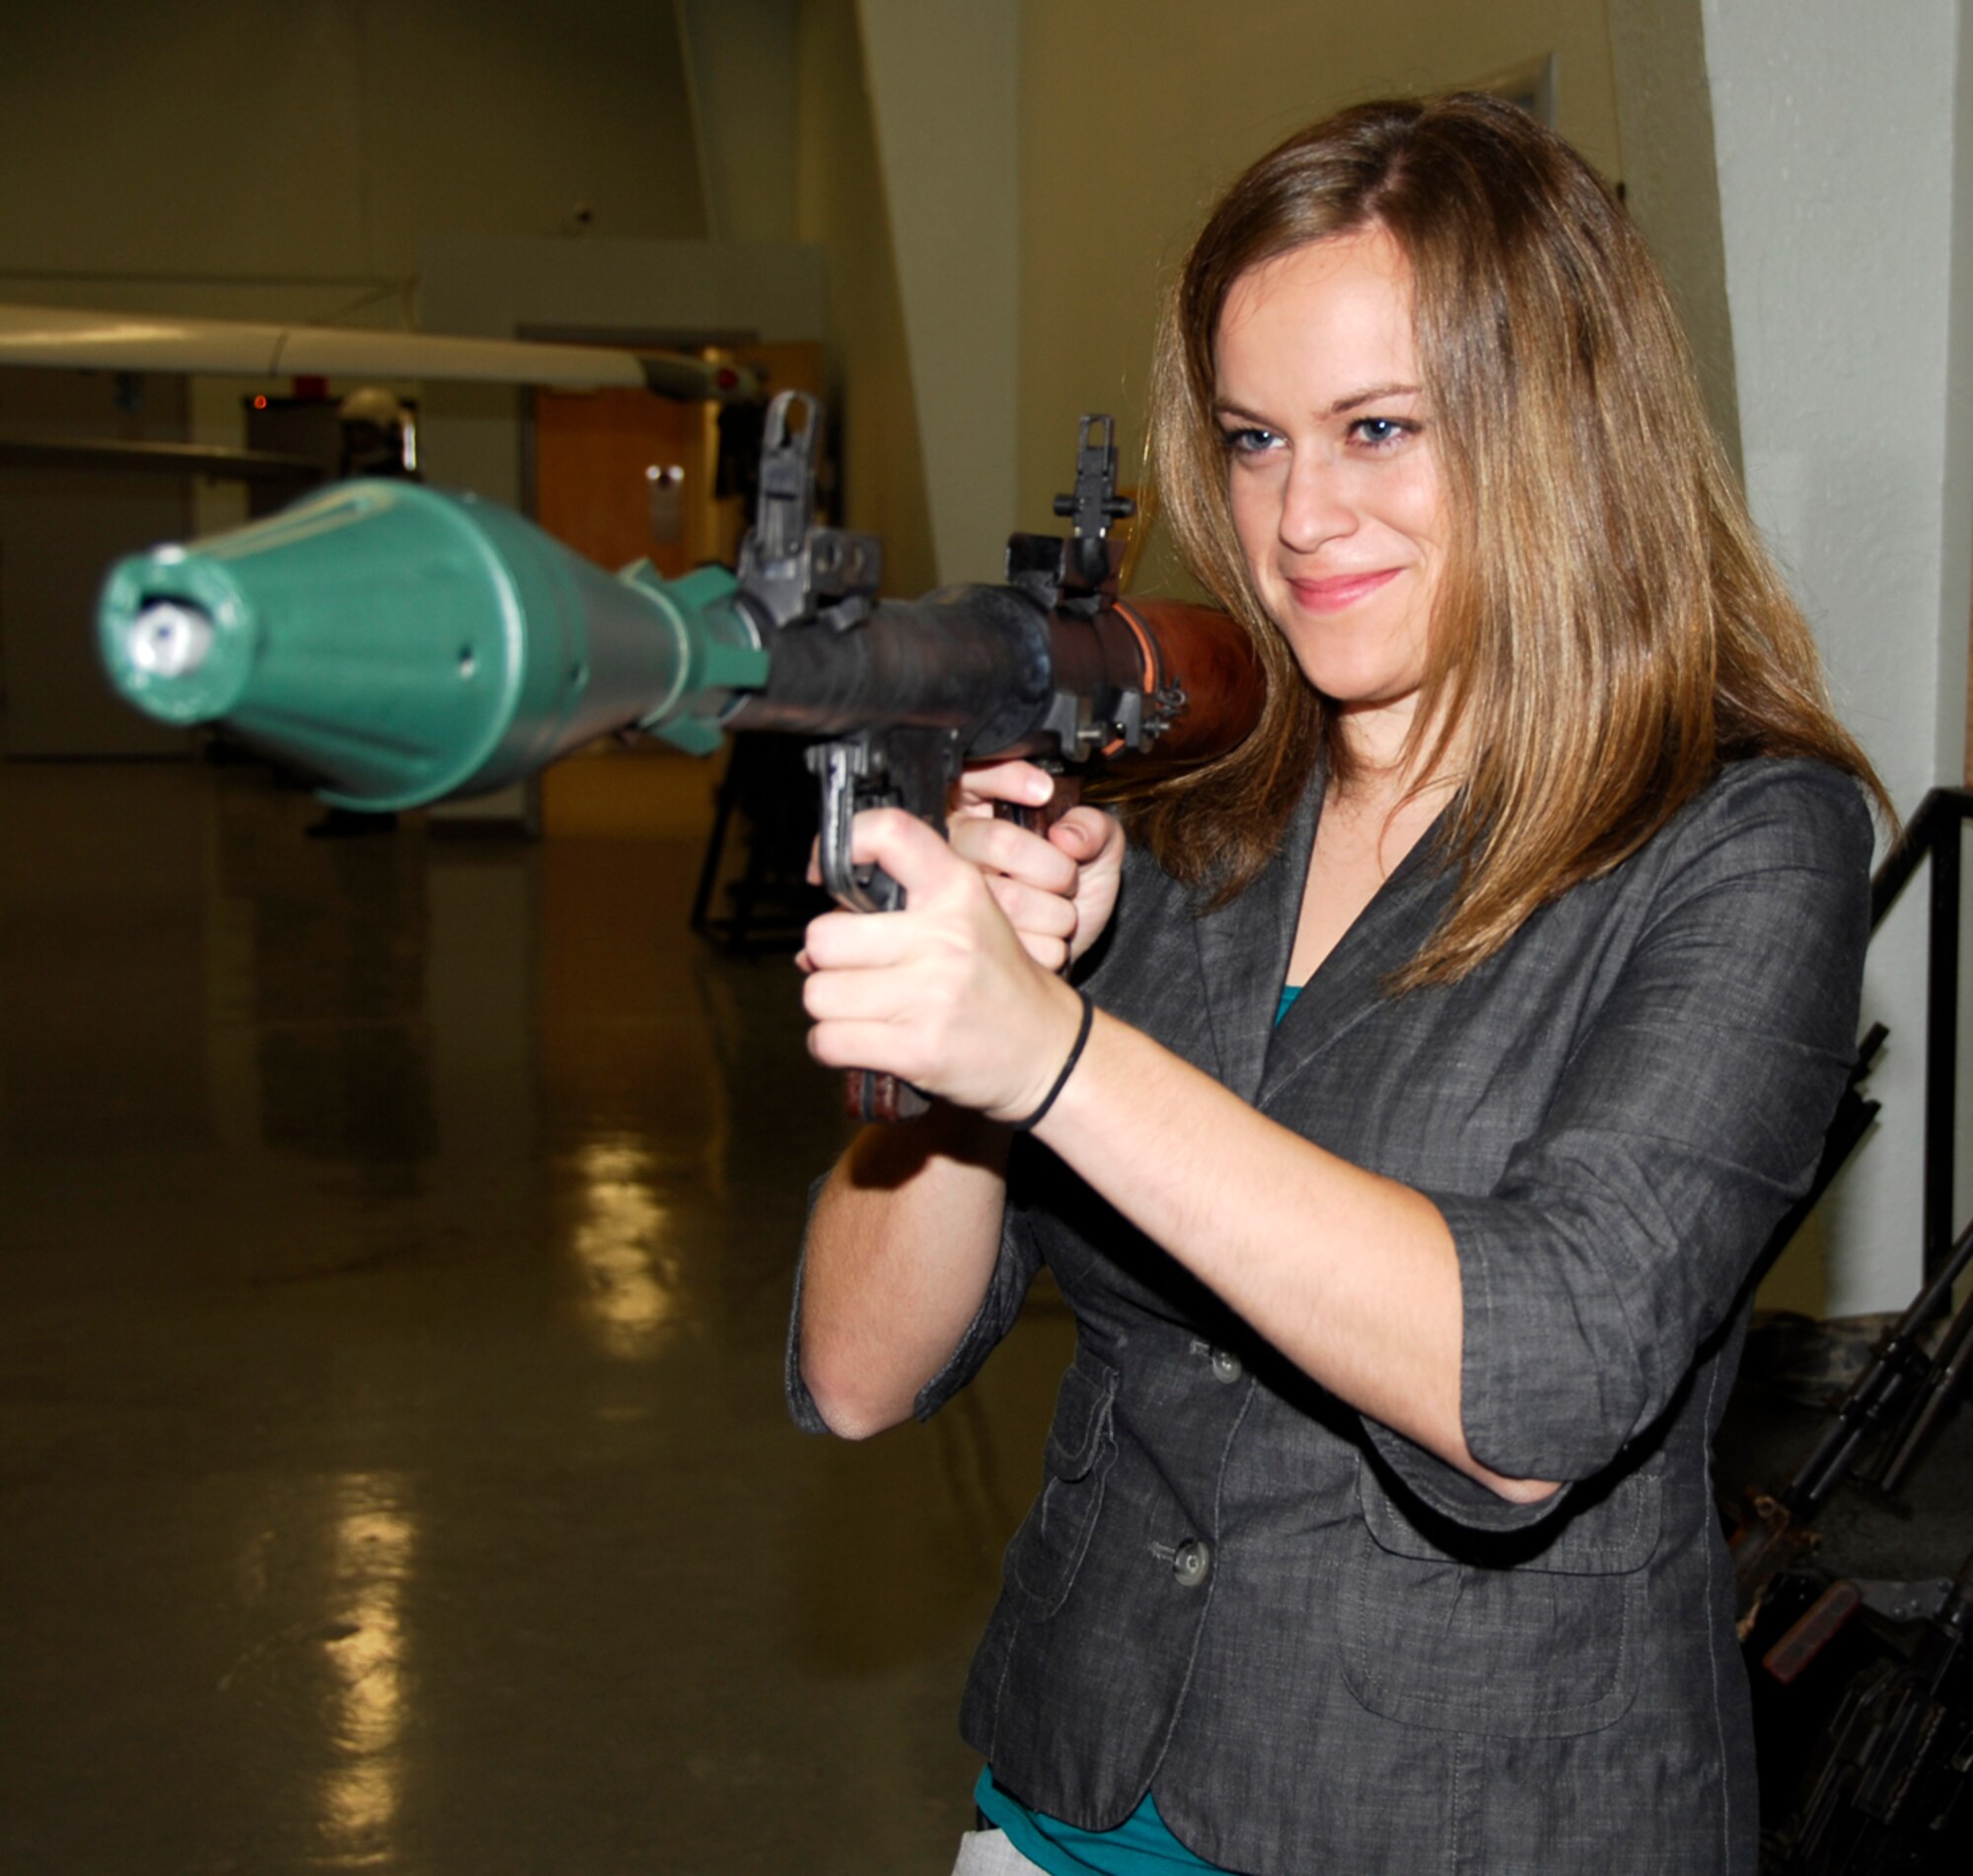 Kelsie Moger, KFTA Fox 24 reporter, handles a nonfunctioning Russian anti-aircraft weapon during a guided tour of the 547th Intelligence Squadron's Threat Systems Area, informally dubbed "The Petting Zoo," at Nellis Air Force Base, Nev., Oct. 15 during a civic tour to the base. The primary objective was to observe the 188th's deployment preparations for the unit's upcoming Aerospace Expeditionary Force (AEF) rotation in Afghanistan in spring 2010. (U.S. Air Force photo by Senior Master Sgt. Dennis Brambl/188th Fighter Wing Public Affairs) 